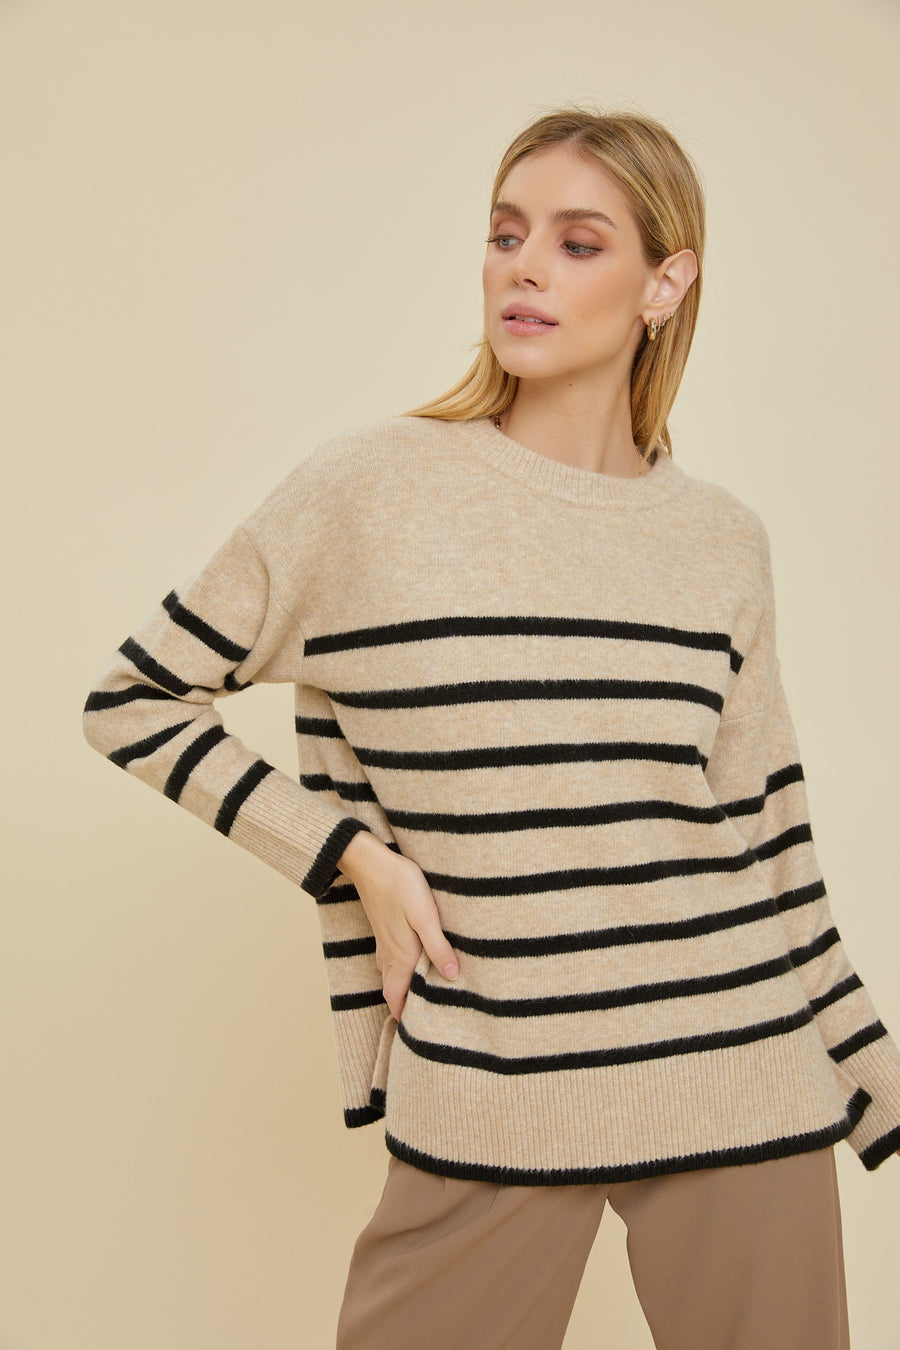 Striped sweater in the color beige.